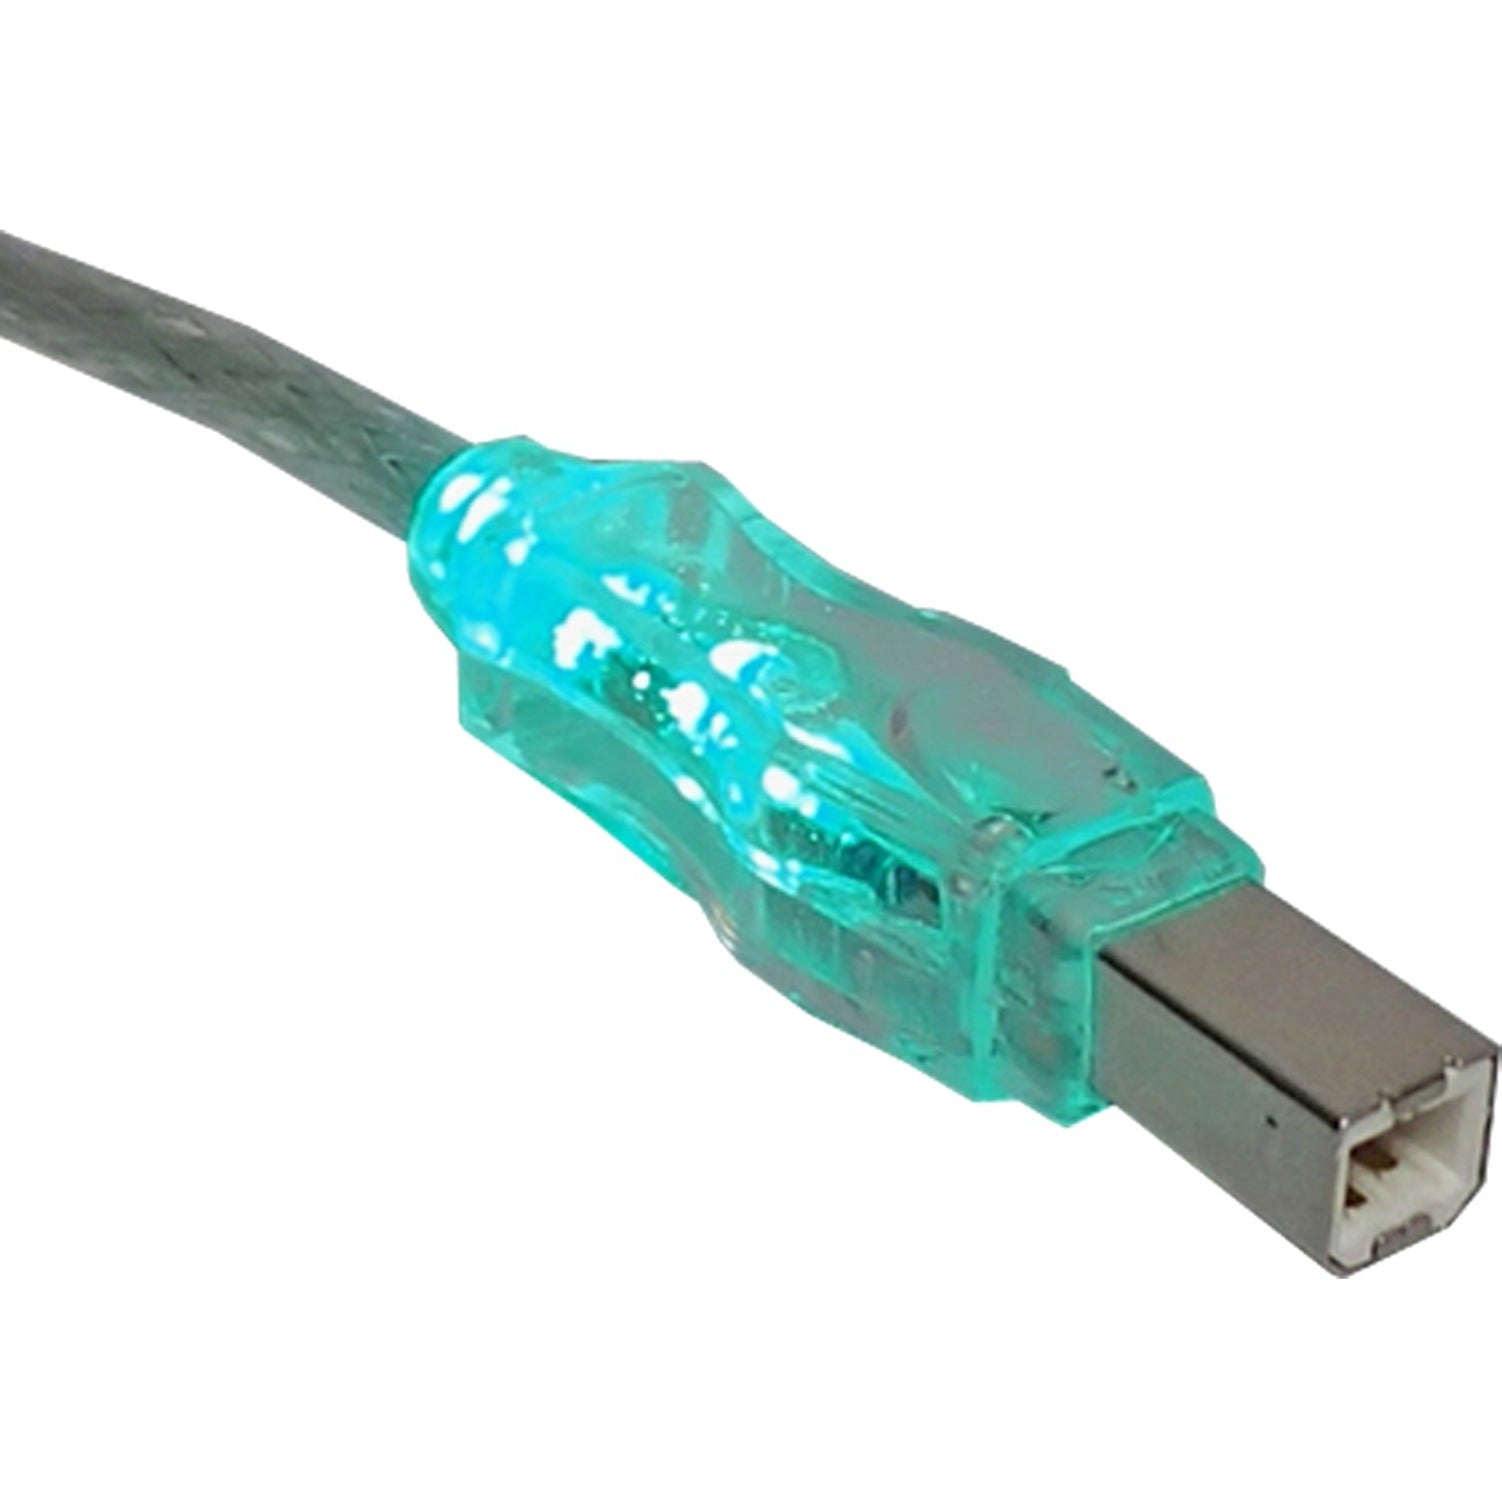 QVS CC2209C-10GNL USB 2.0 480Mbps Type A Male to B Male Translucent Cable with Green LEDs, 10ft Length